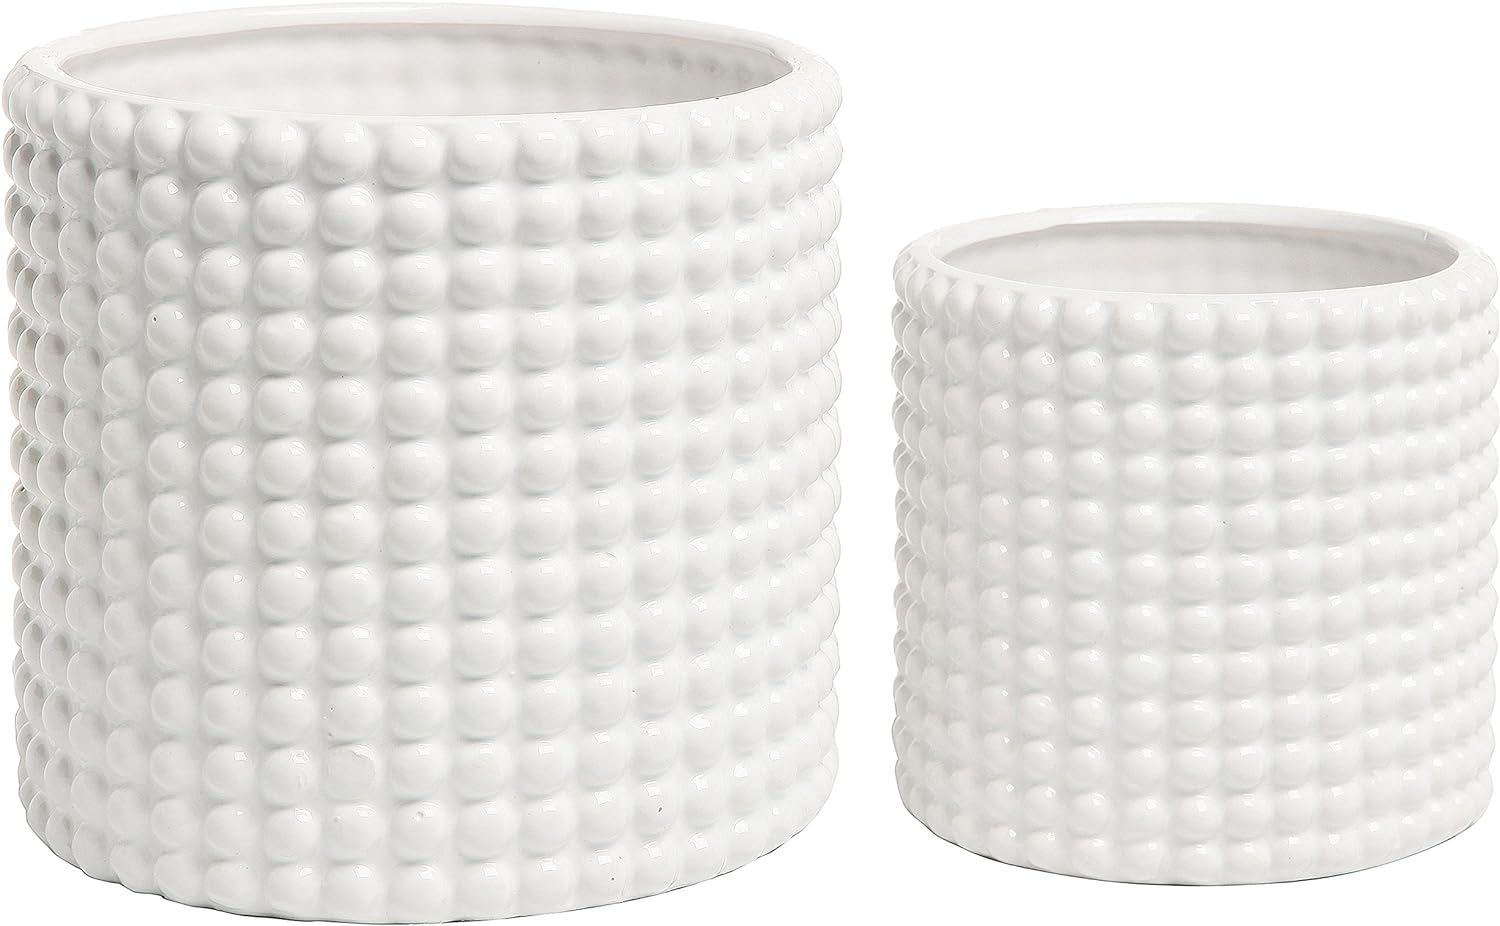 MyGift 6 Inch Ceramic Round Planter Pot, Set of 2 Vintage-Style White Ceramic Flower Pots, Indoor Hobnail Textured Cylindrical Succulent Plant Containers